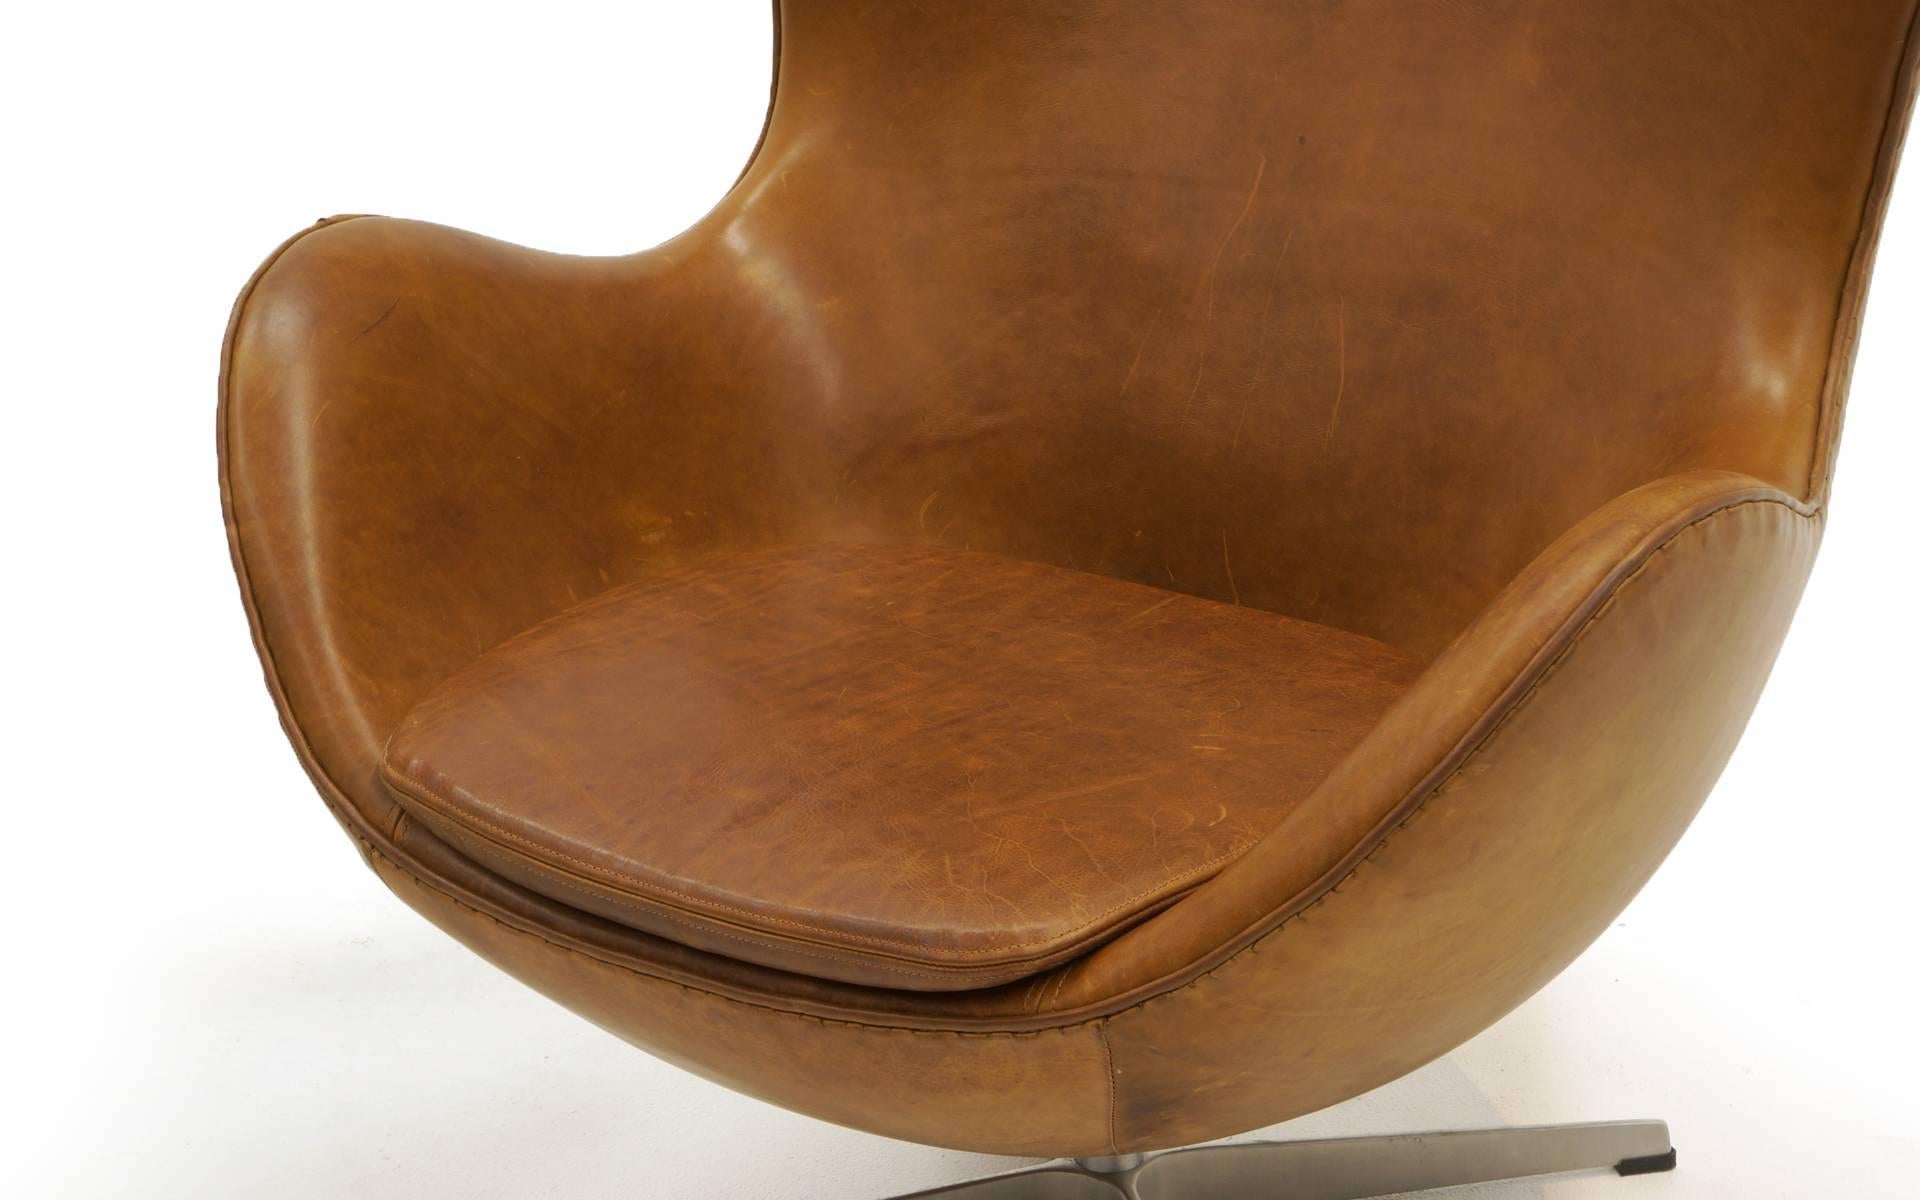 Late 20th Century Pair of Arne Jacobsen Egg Chairs in Cognac / Tan Leather, Made by Fritz Hansen